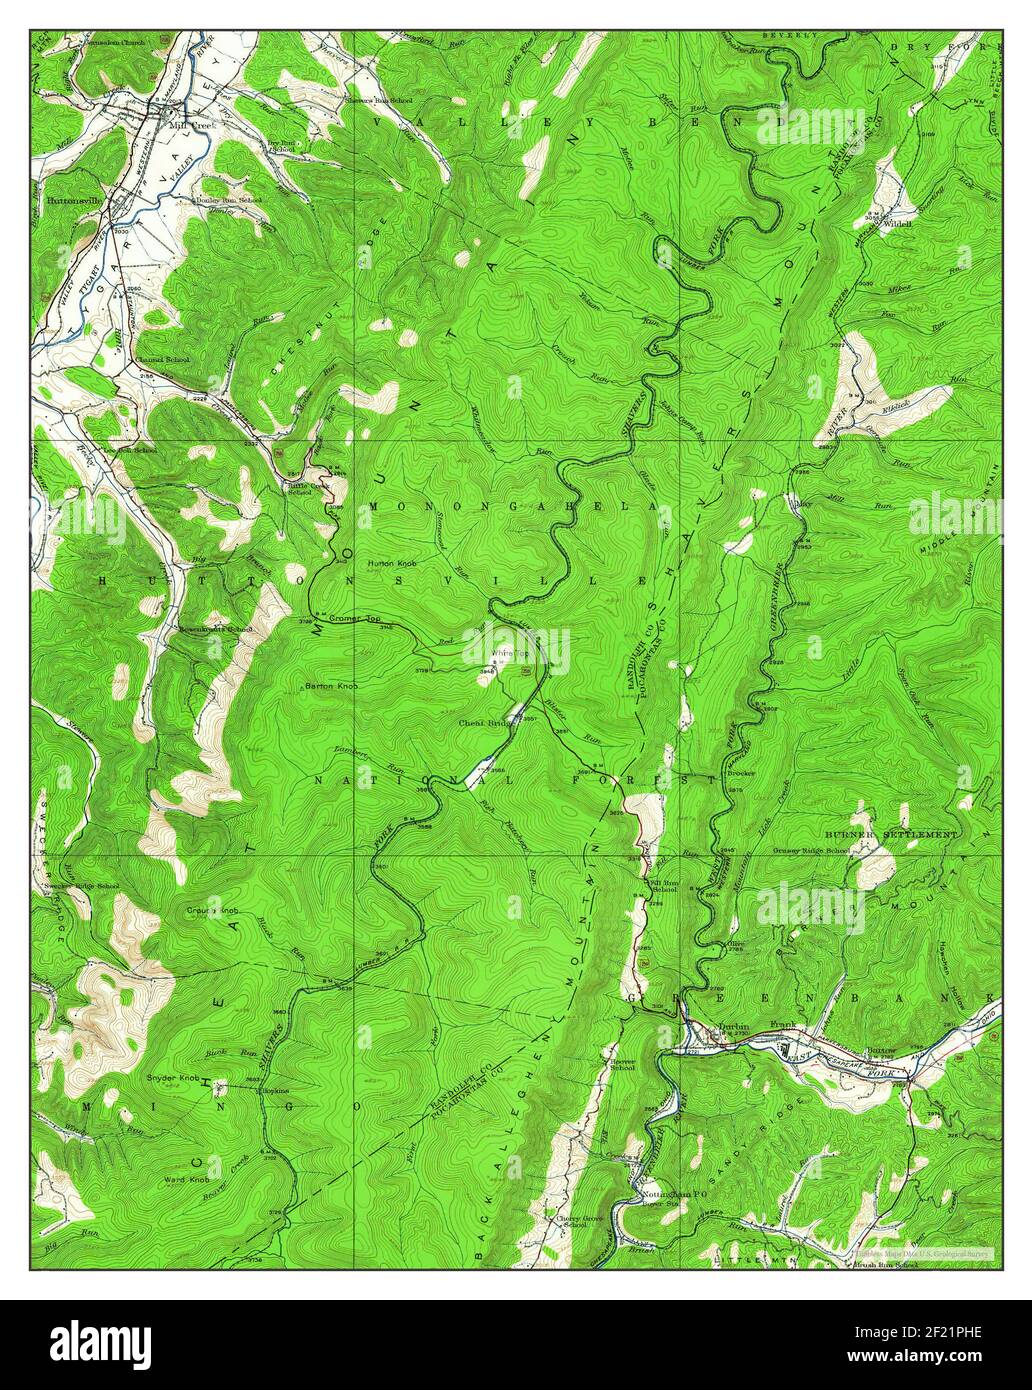 Durbin, West Virginia, map 1922, 1:62500, United States of America by Timeless Maps, data U.S. Geological Survey Stock Photo